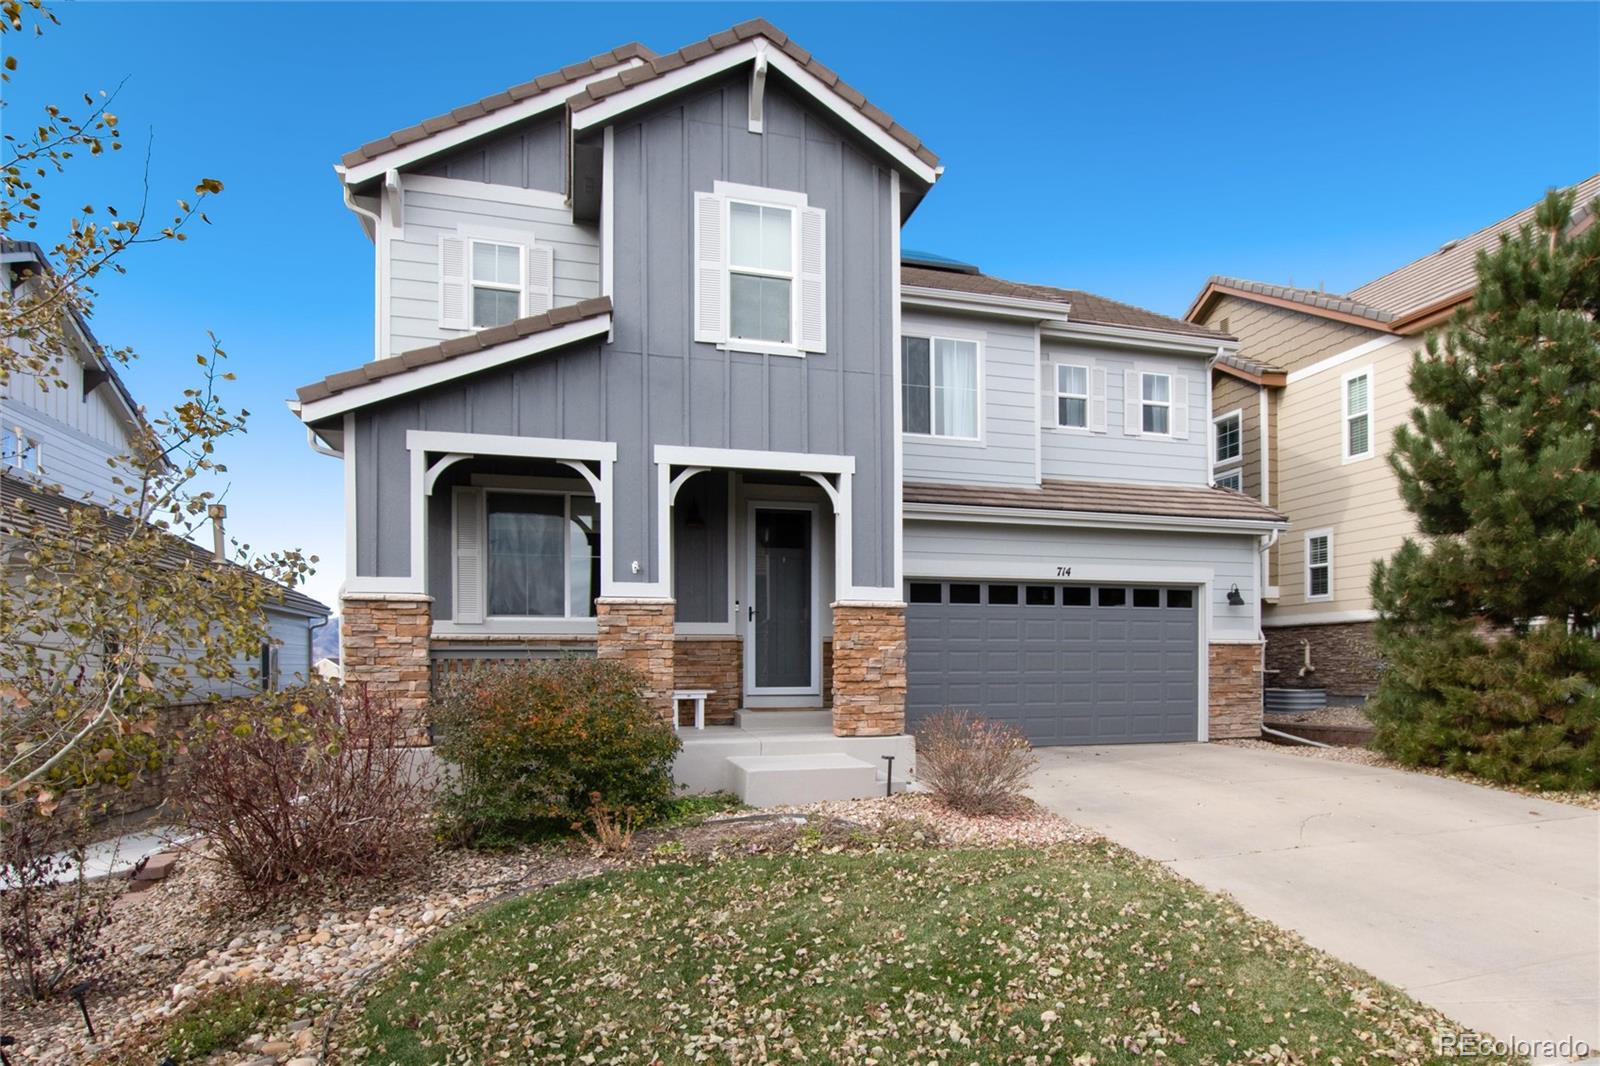 714  Tiger Lily Way, highlands ranch MLS: 6275826 Beds: 4 Baths: 4 Price: $1,025,000